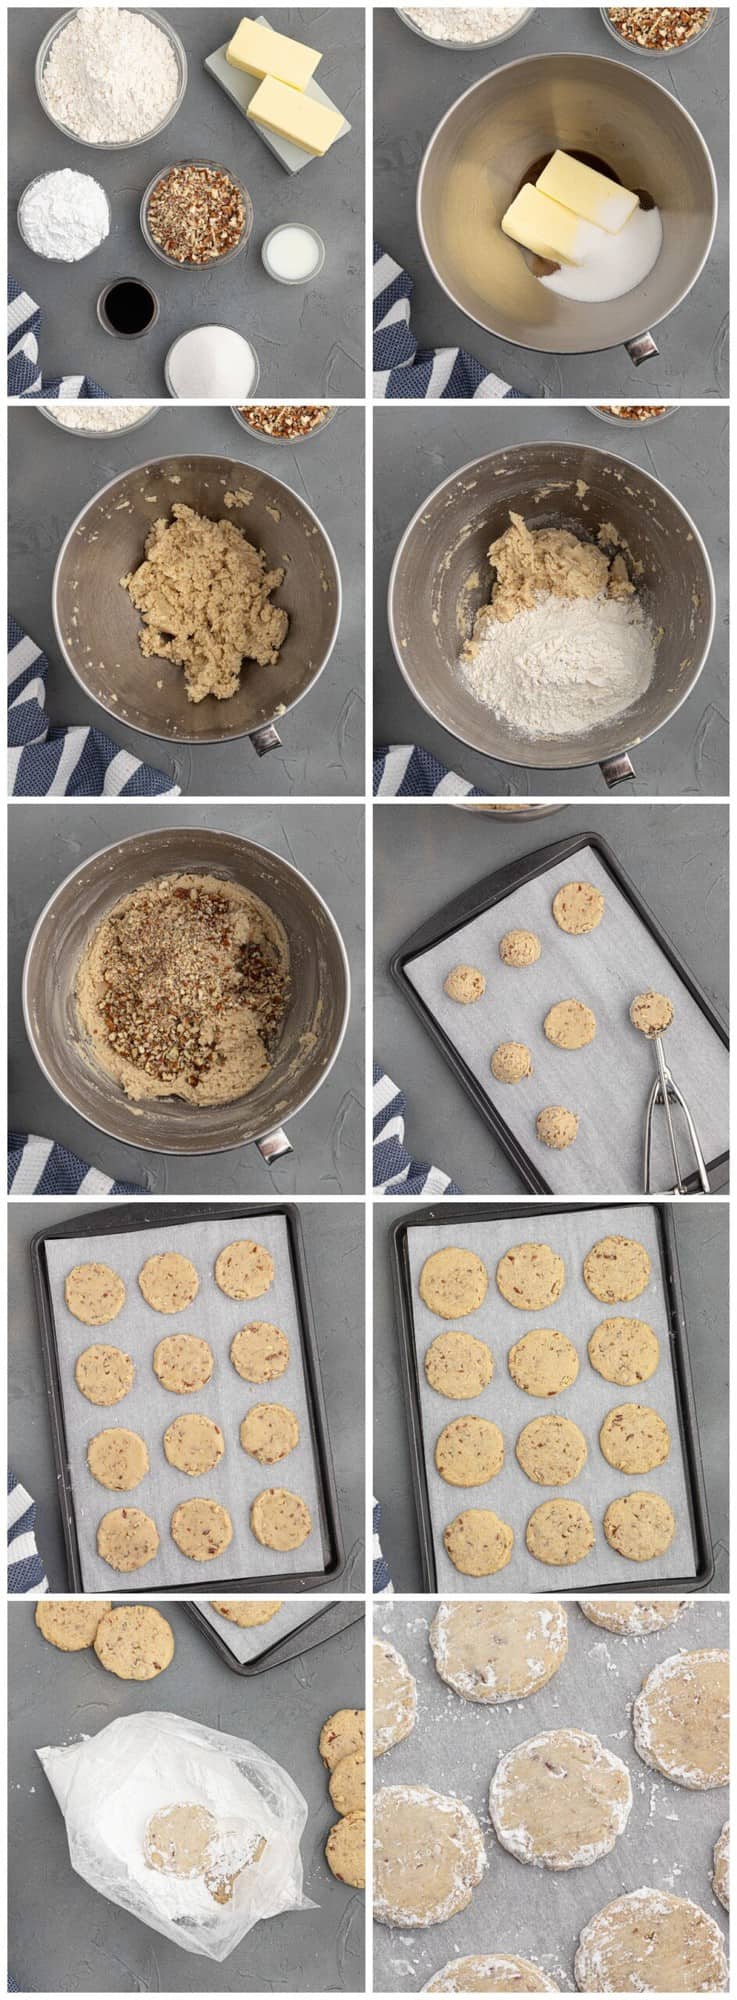 step by step photos for how to make pecan sandies